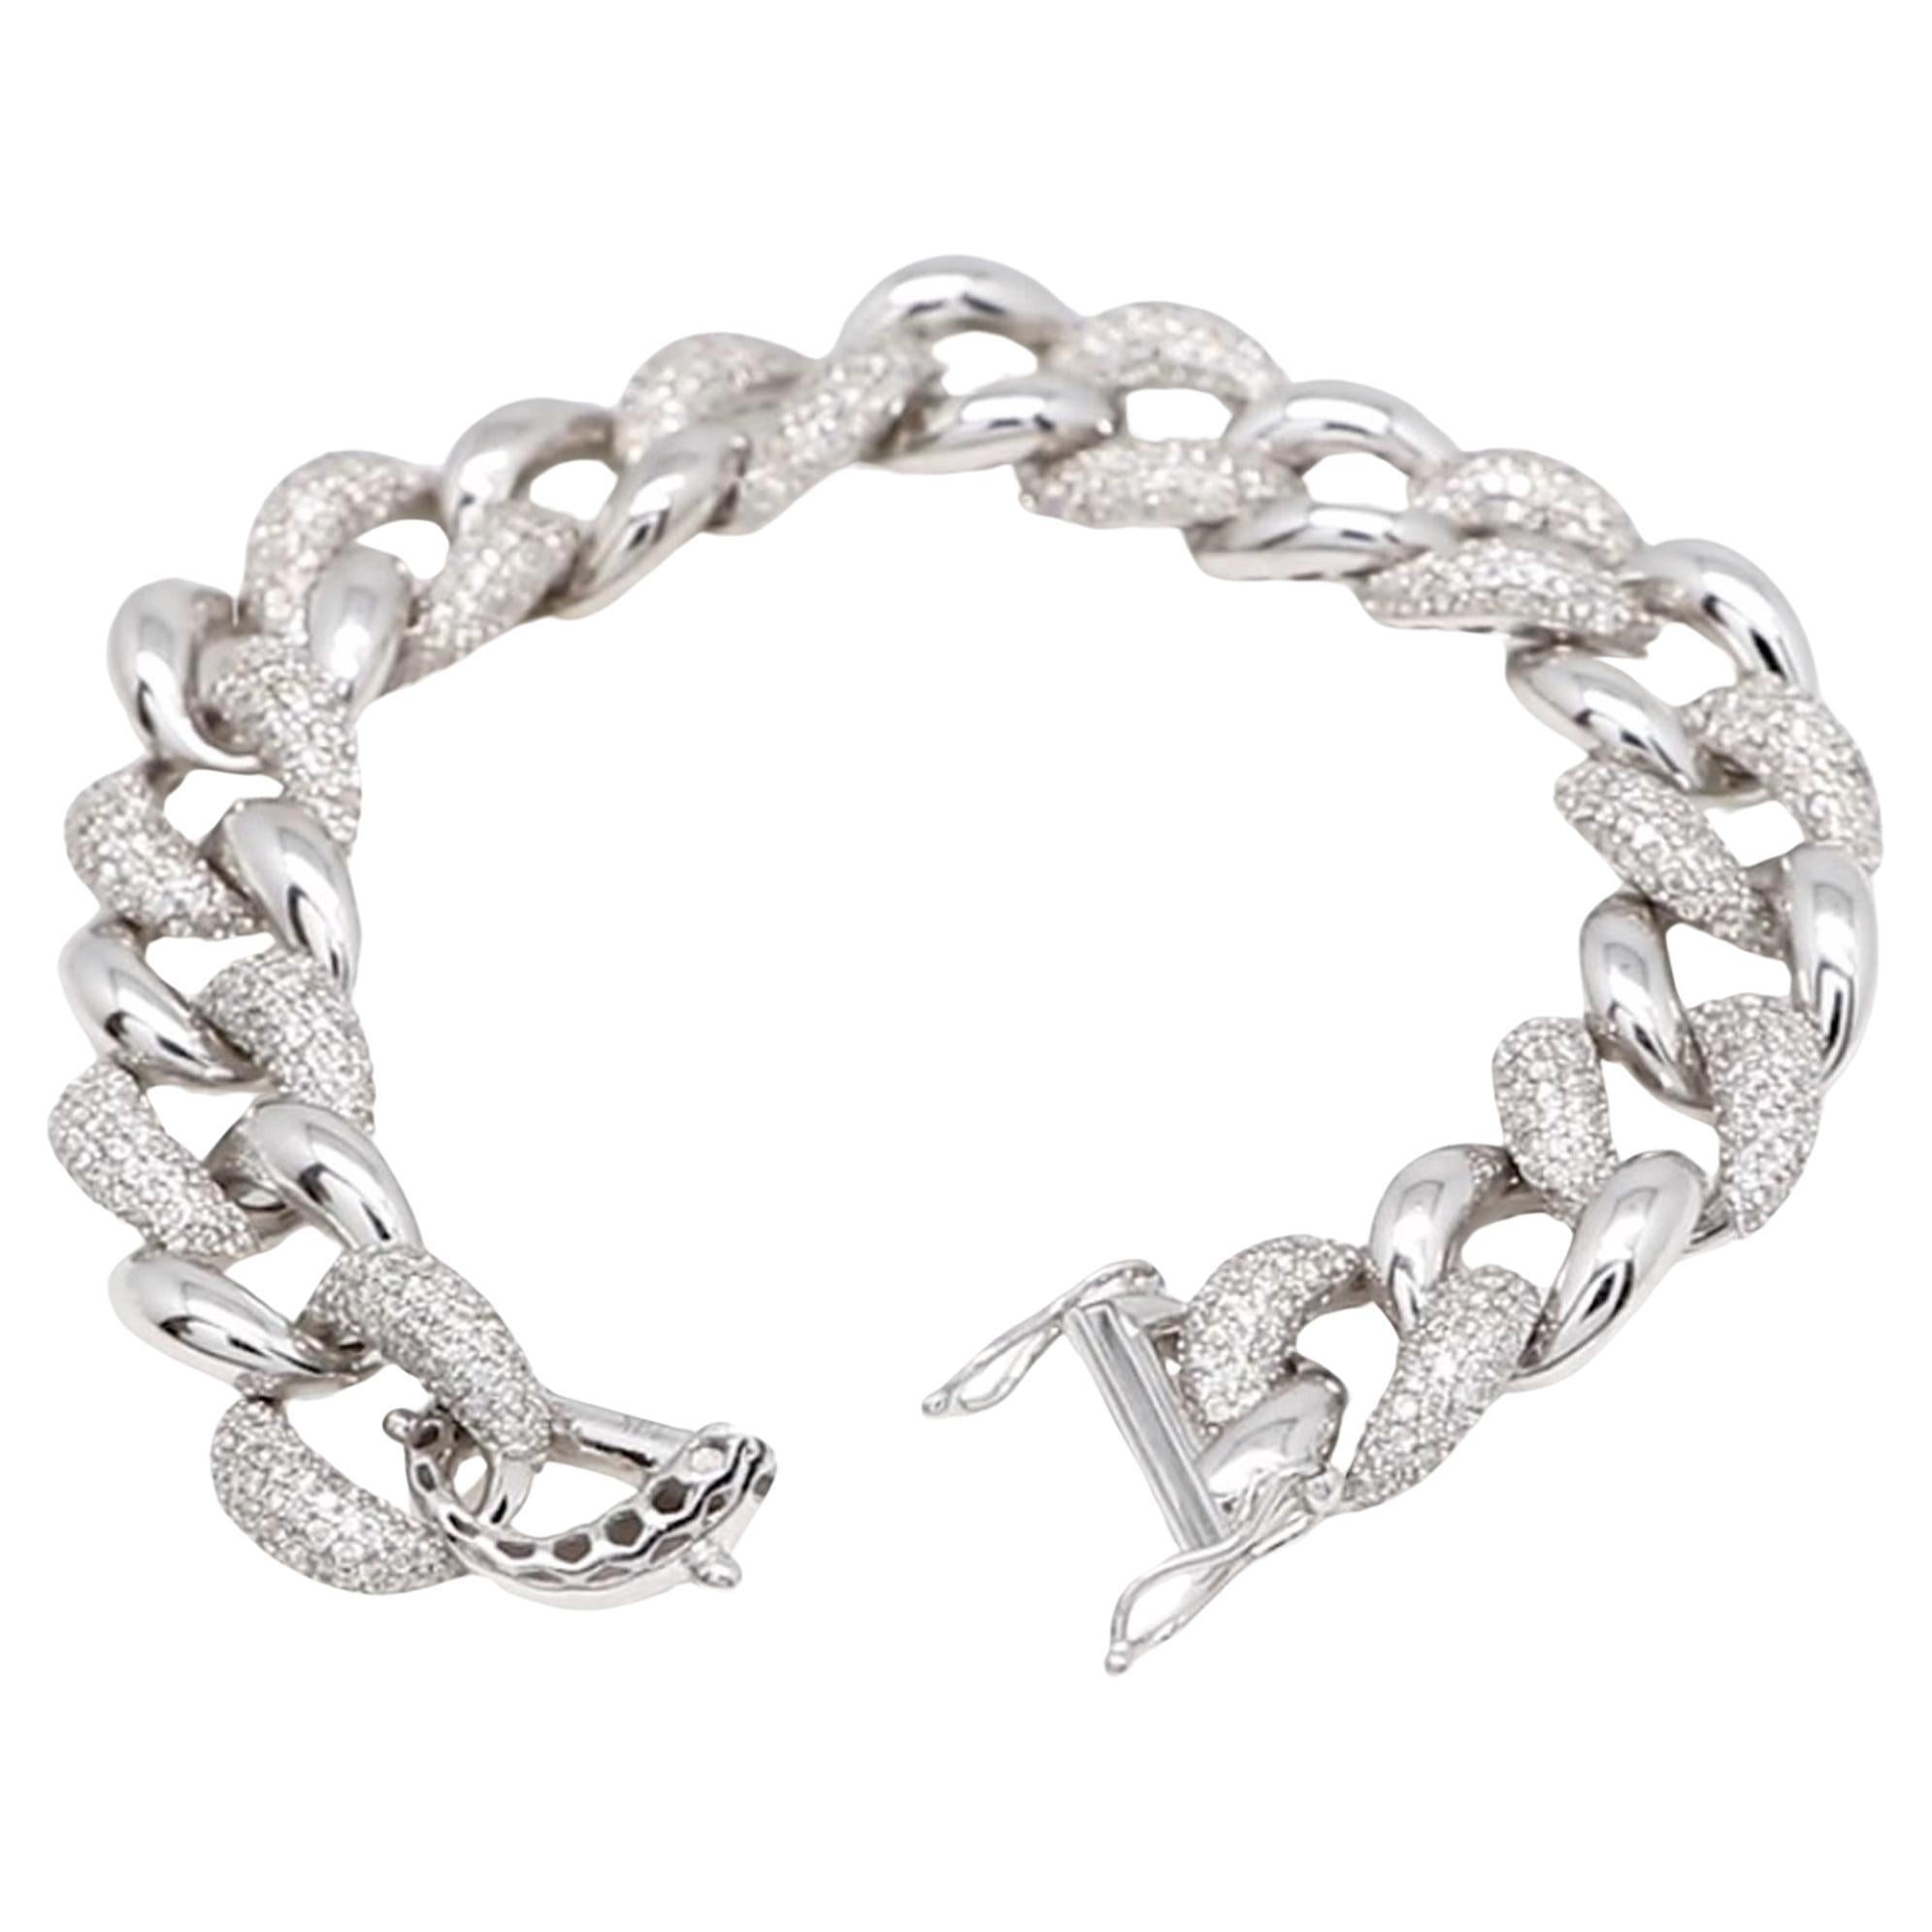 Indulge in the timeless elegance of this exquisite SI clarity, HI color diamond link chain bracelet crafted in 14 karat white gold. Each link of this stunning bracelet is meticulously crafted to showcase the brilliance and sparkle of high-quality